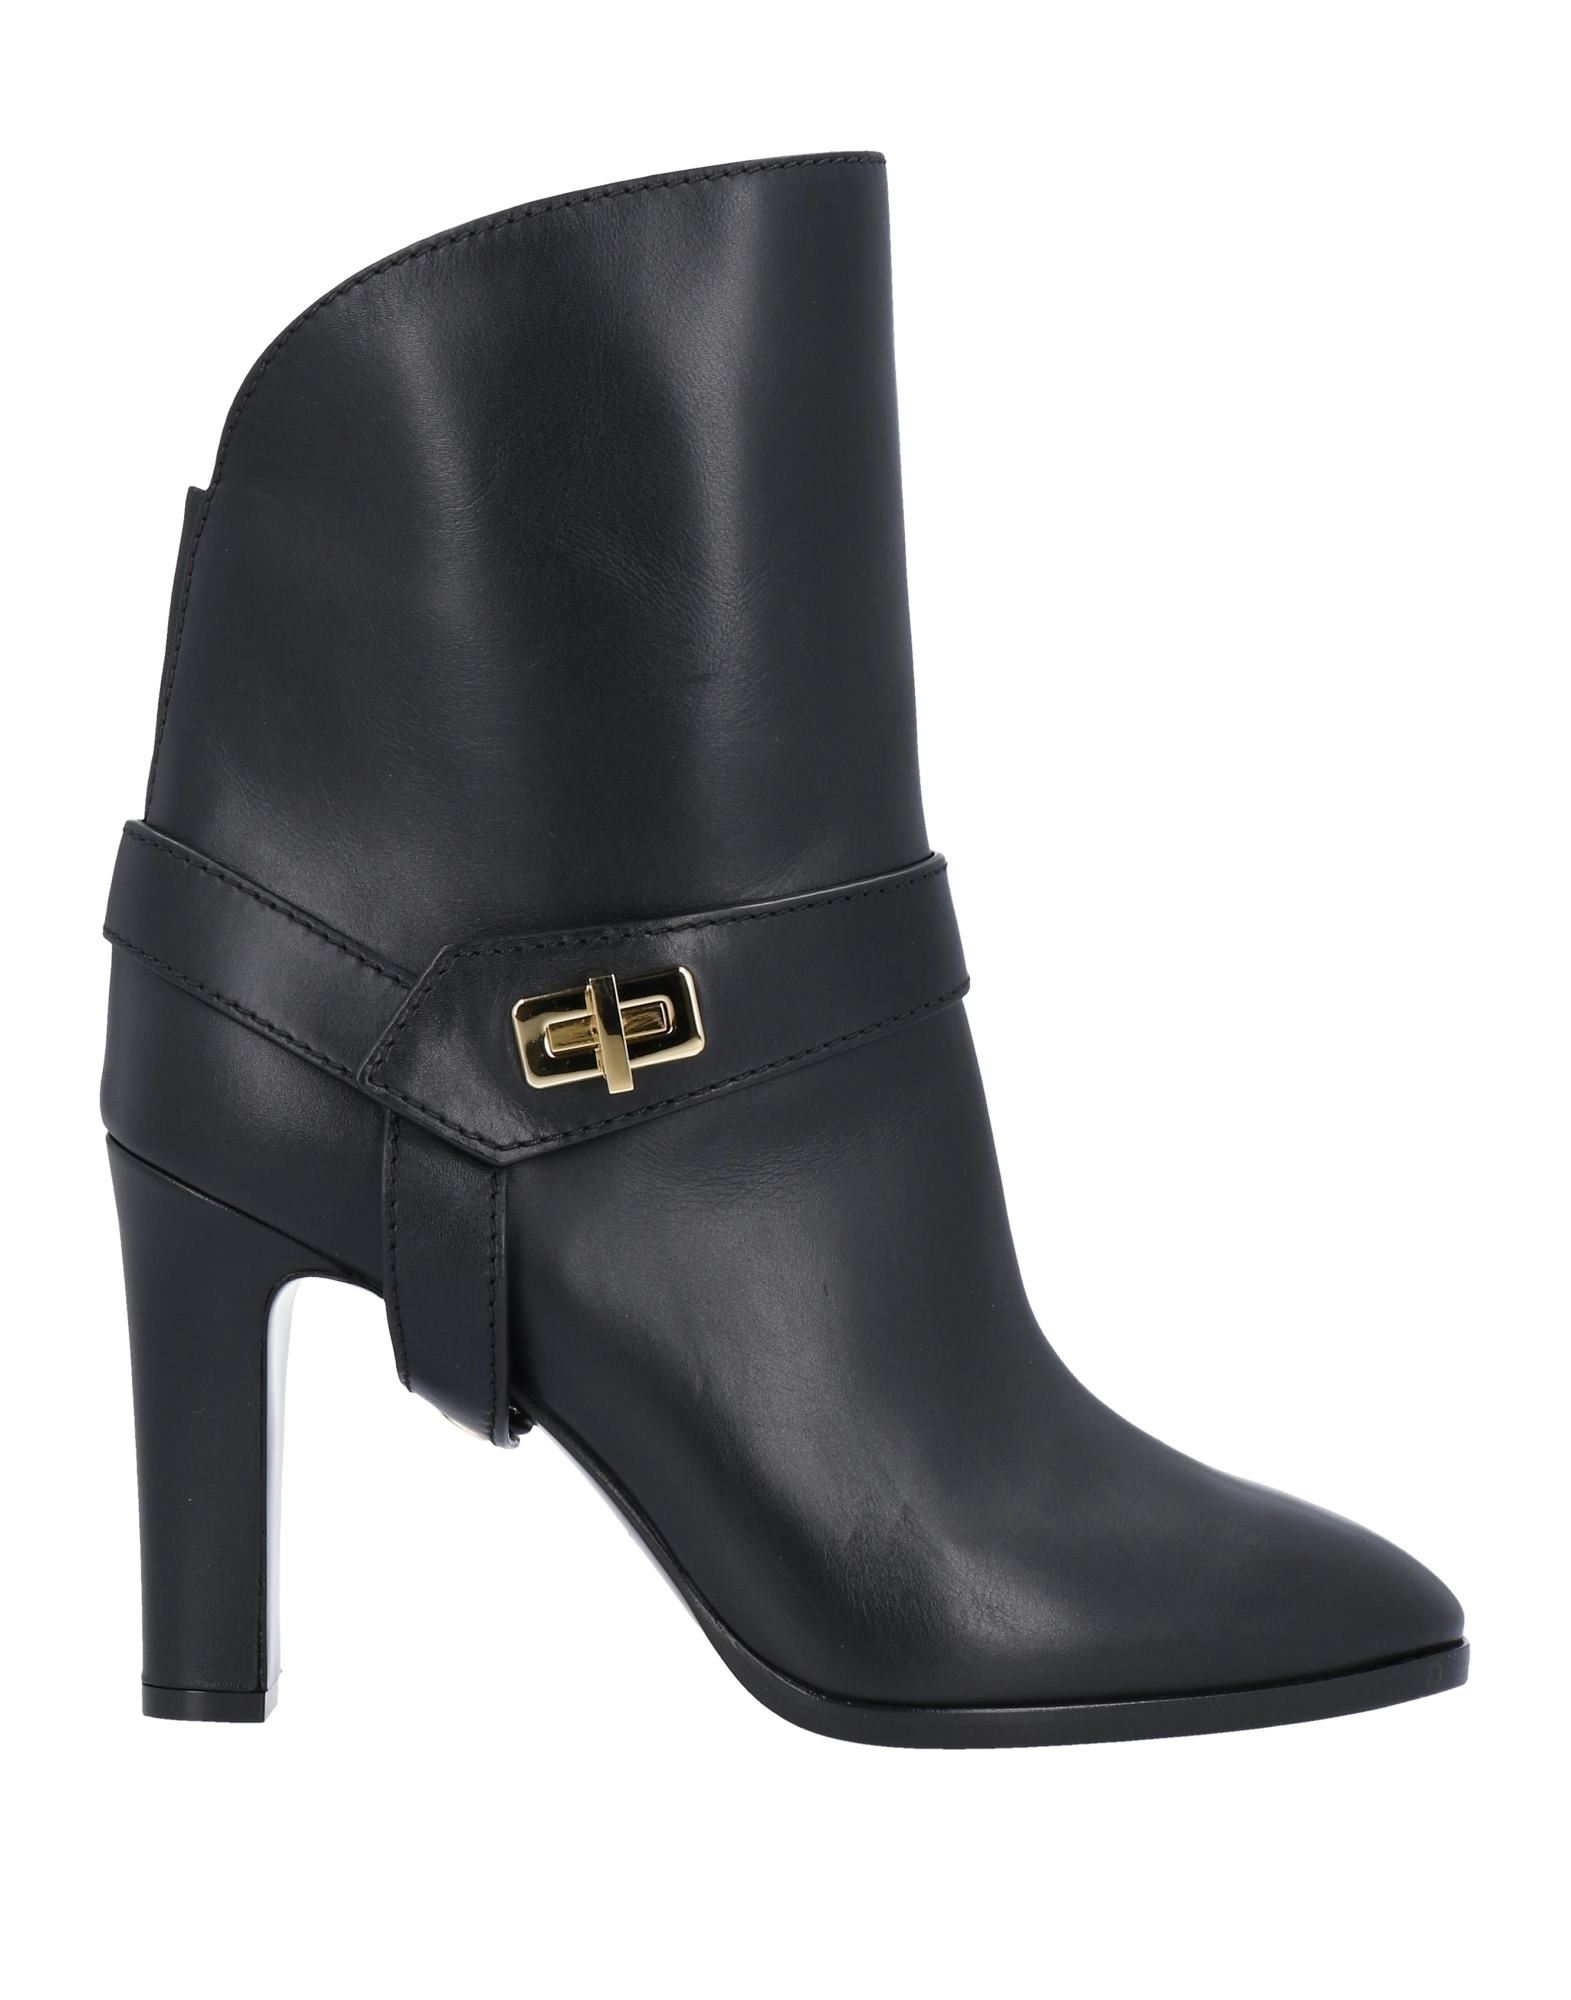 Shop Givenchy Woman Ankle Boots Black Size 8 Calfskin